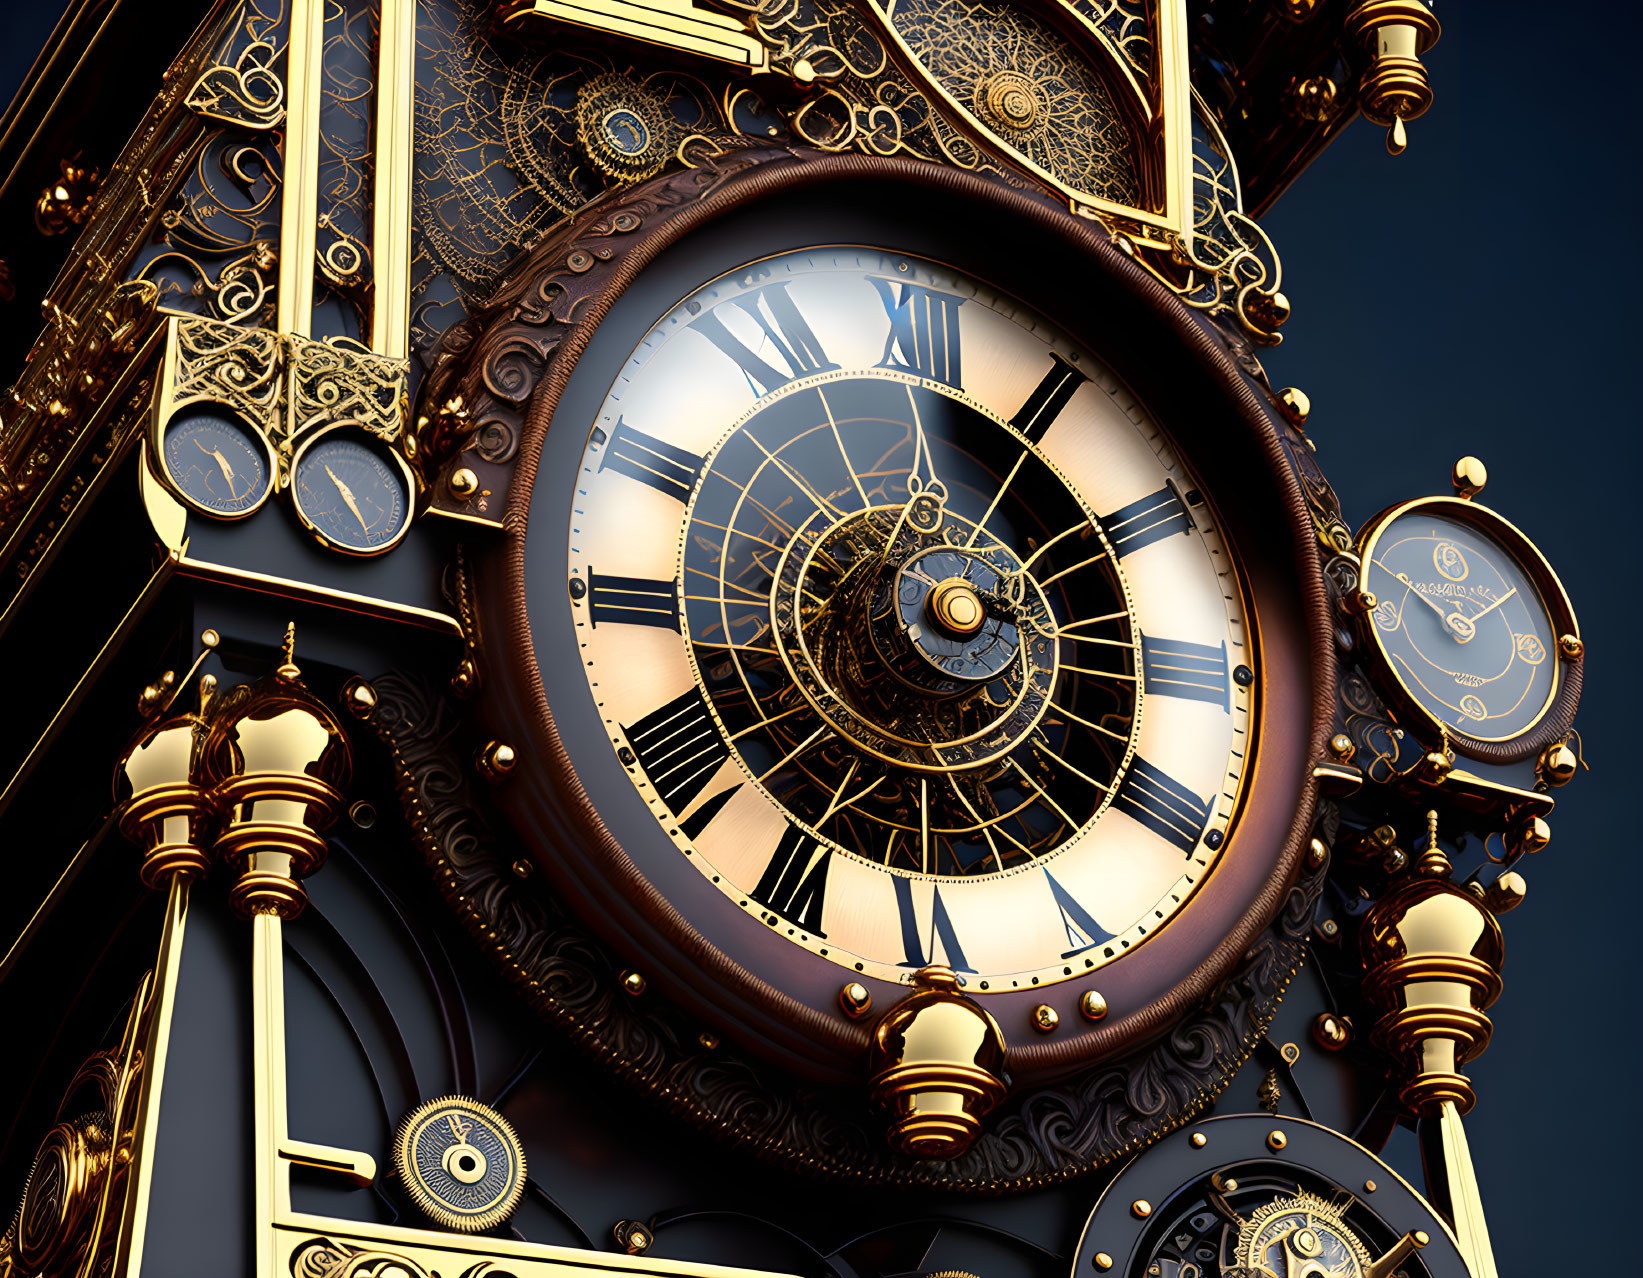 Golden gears and intricate patterns on ornate clock against dark backdrop